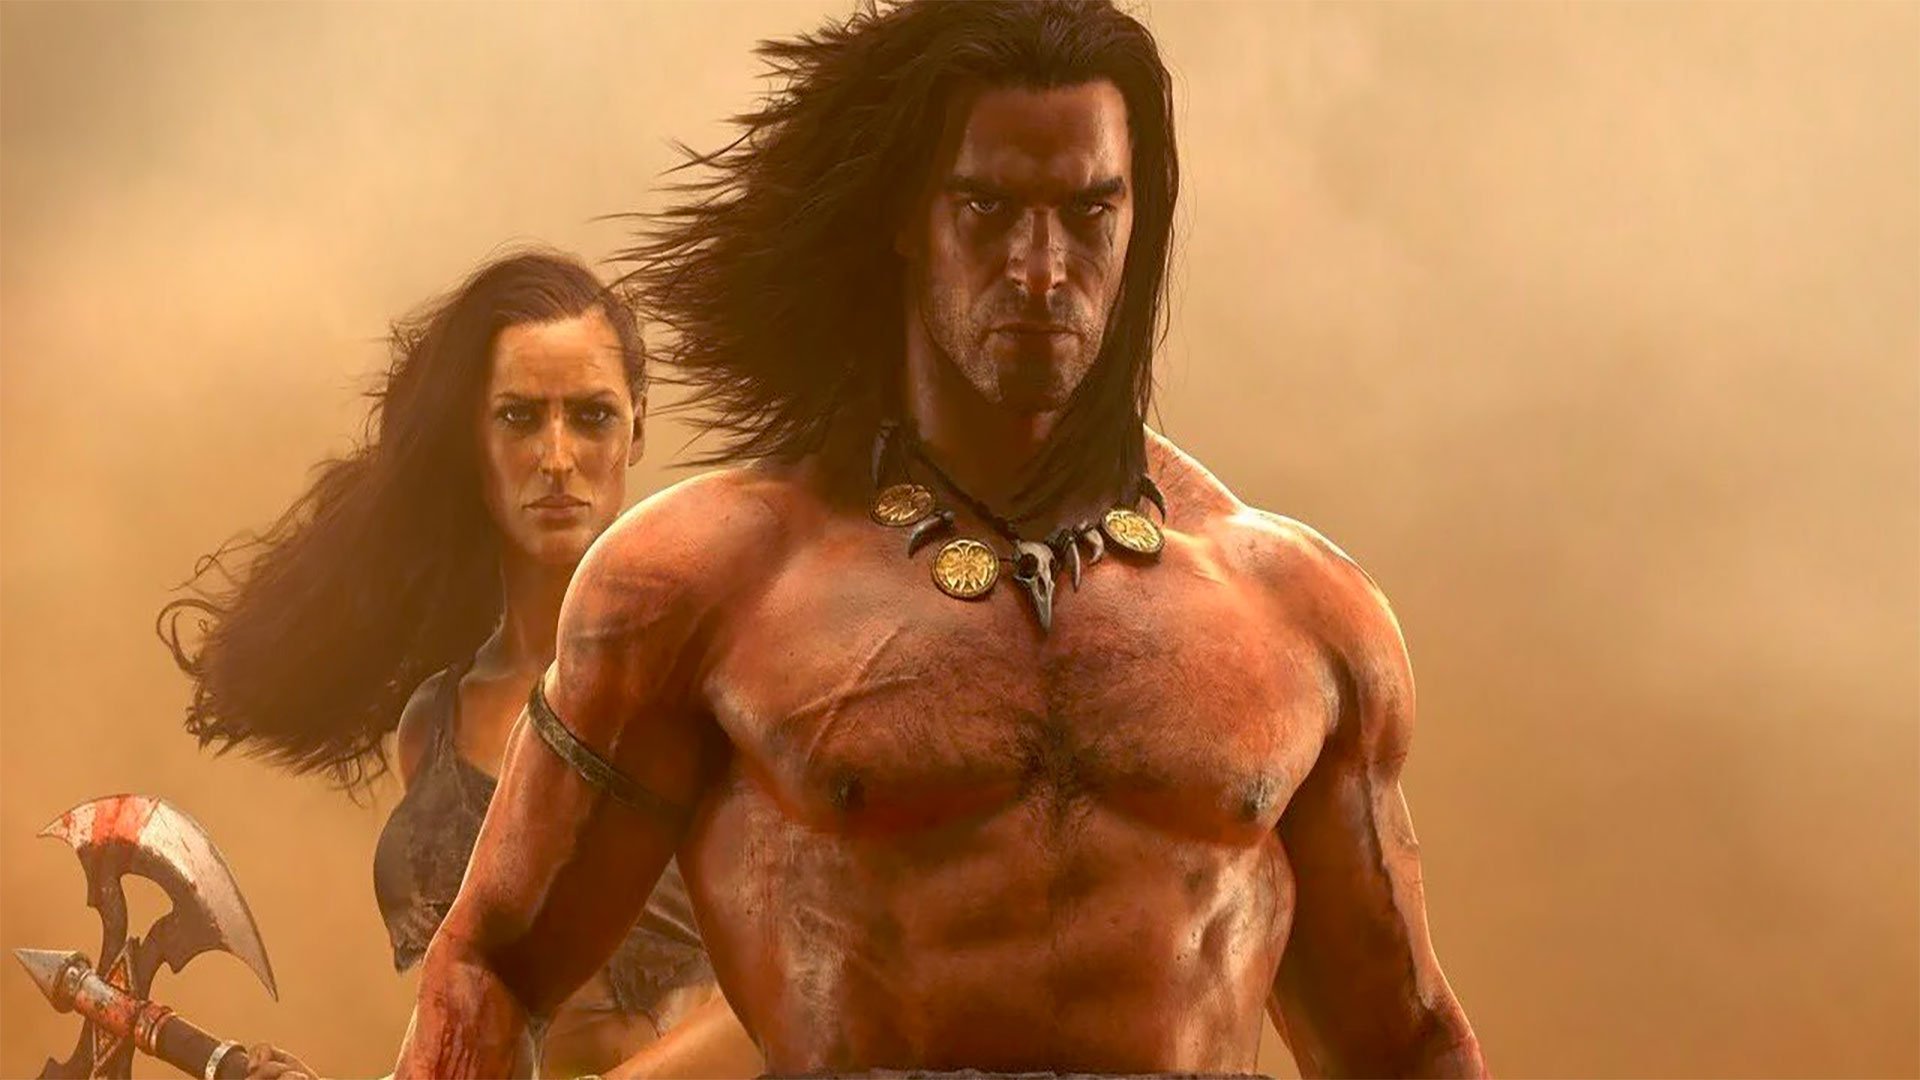 PlayStation Plus’ April lineup includes Conan Exiles and more, but it’s rather lacking